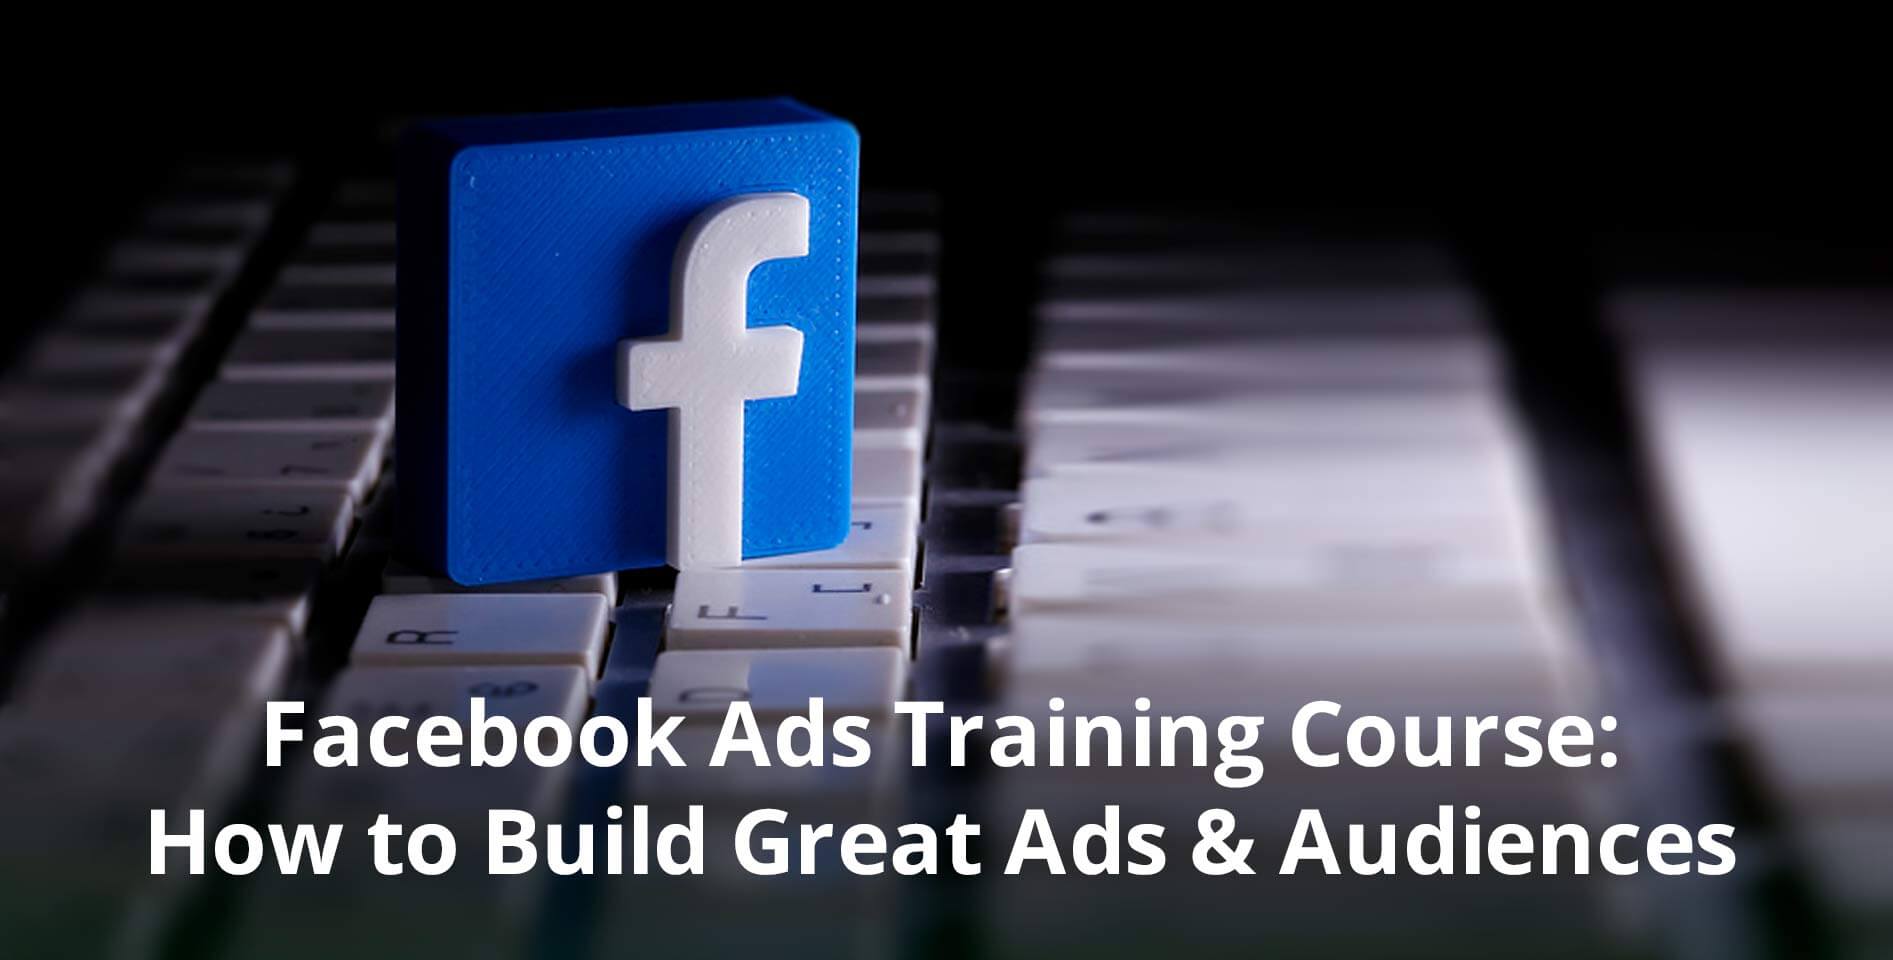 HubSpot — Facebook Ads Training Course: How to Build Great Ads & Audiences